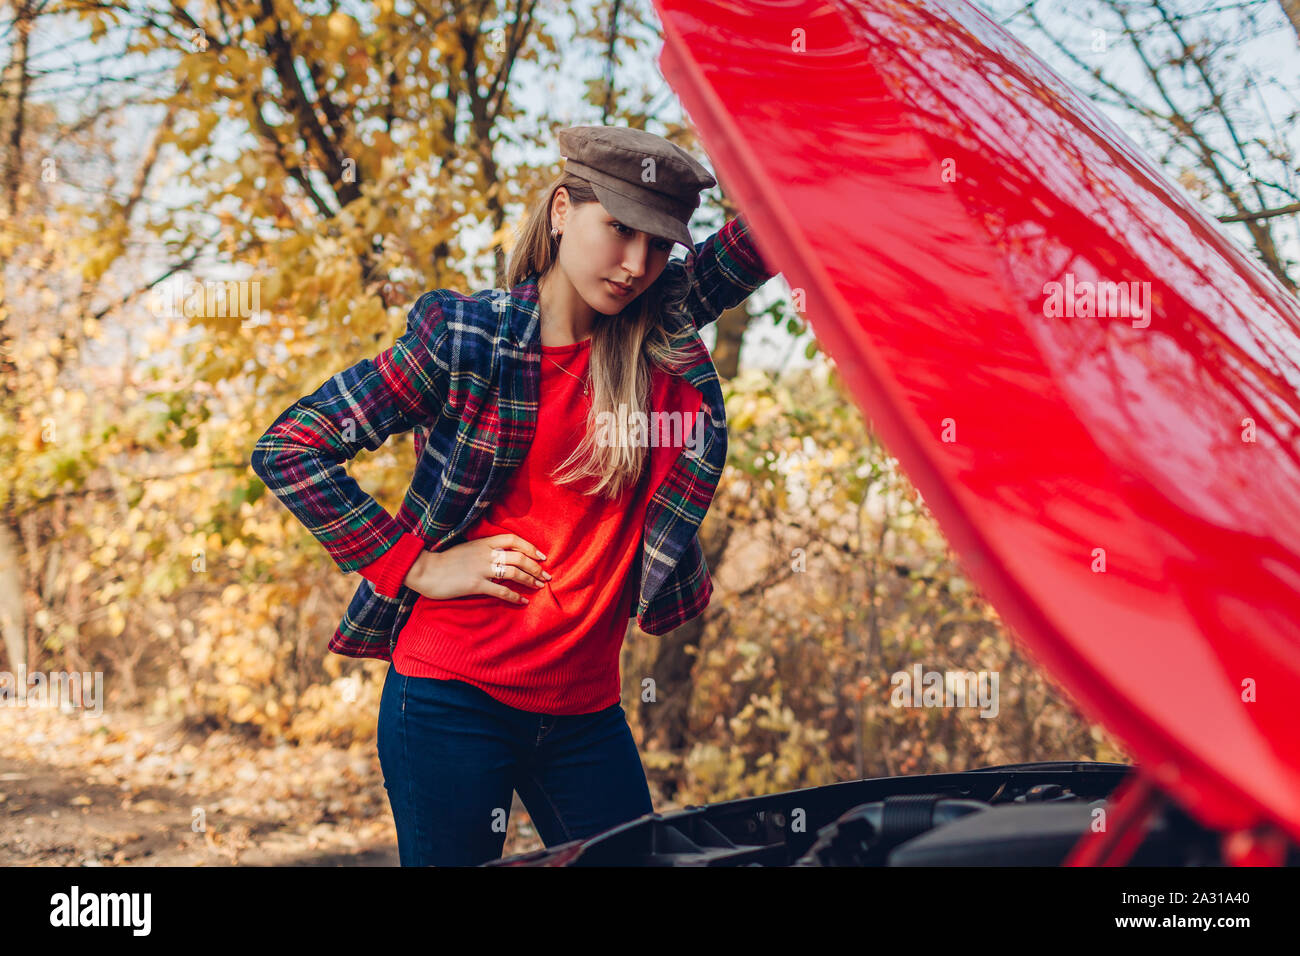 Broken car. Sad woman opening hood of her auto that stopped on road outdoors. Breakage Stock Photo